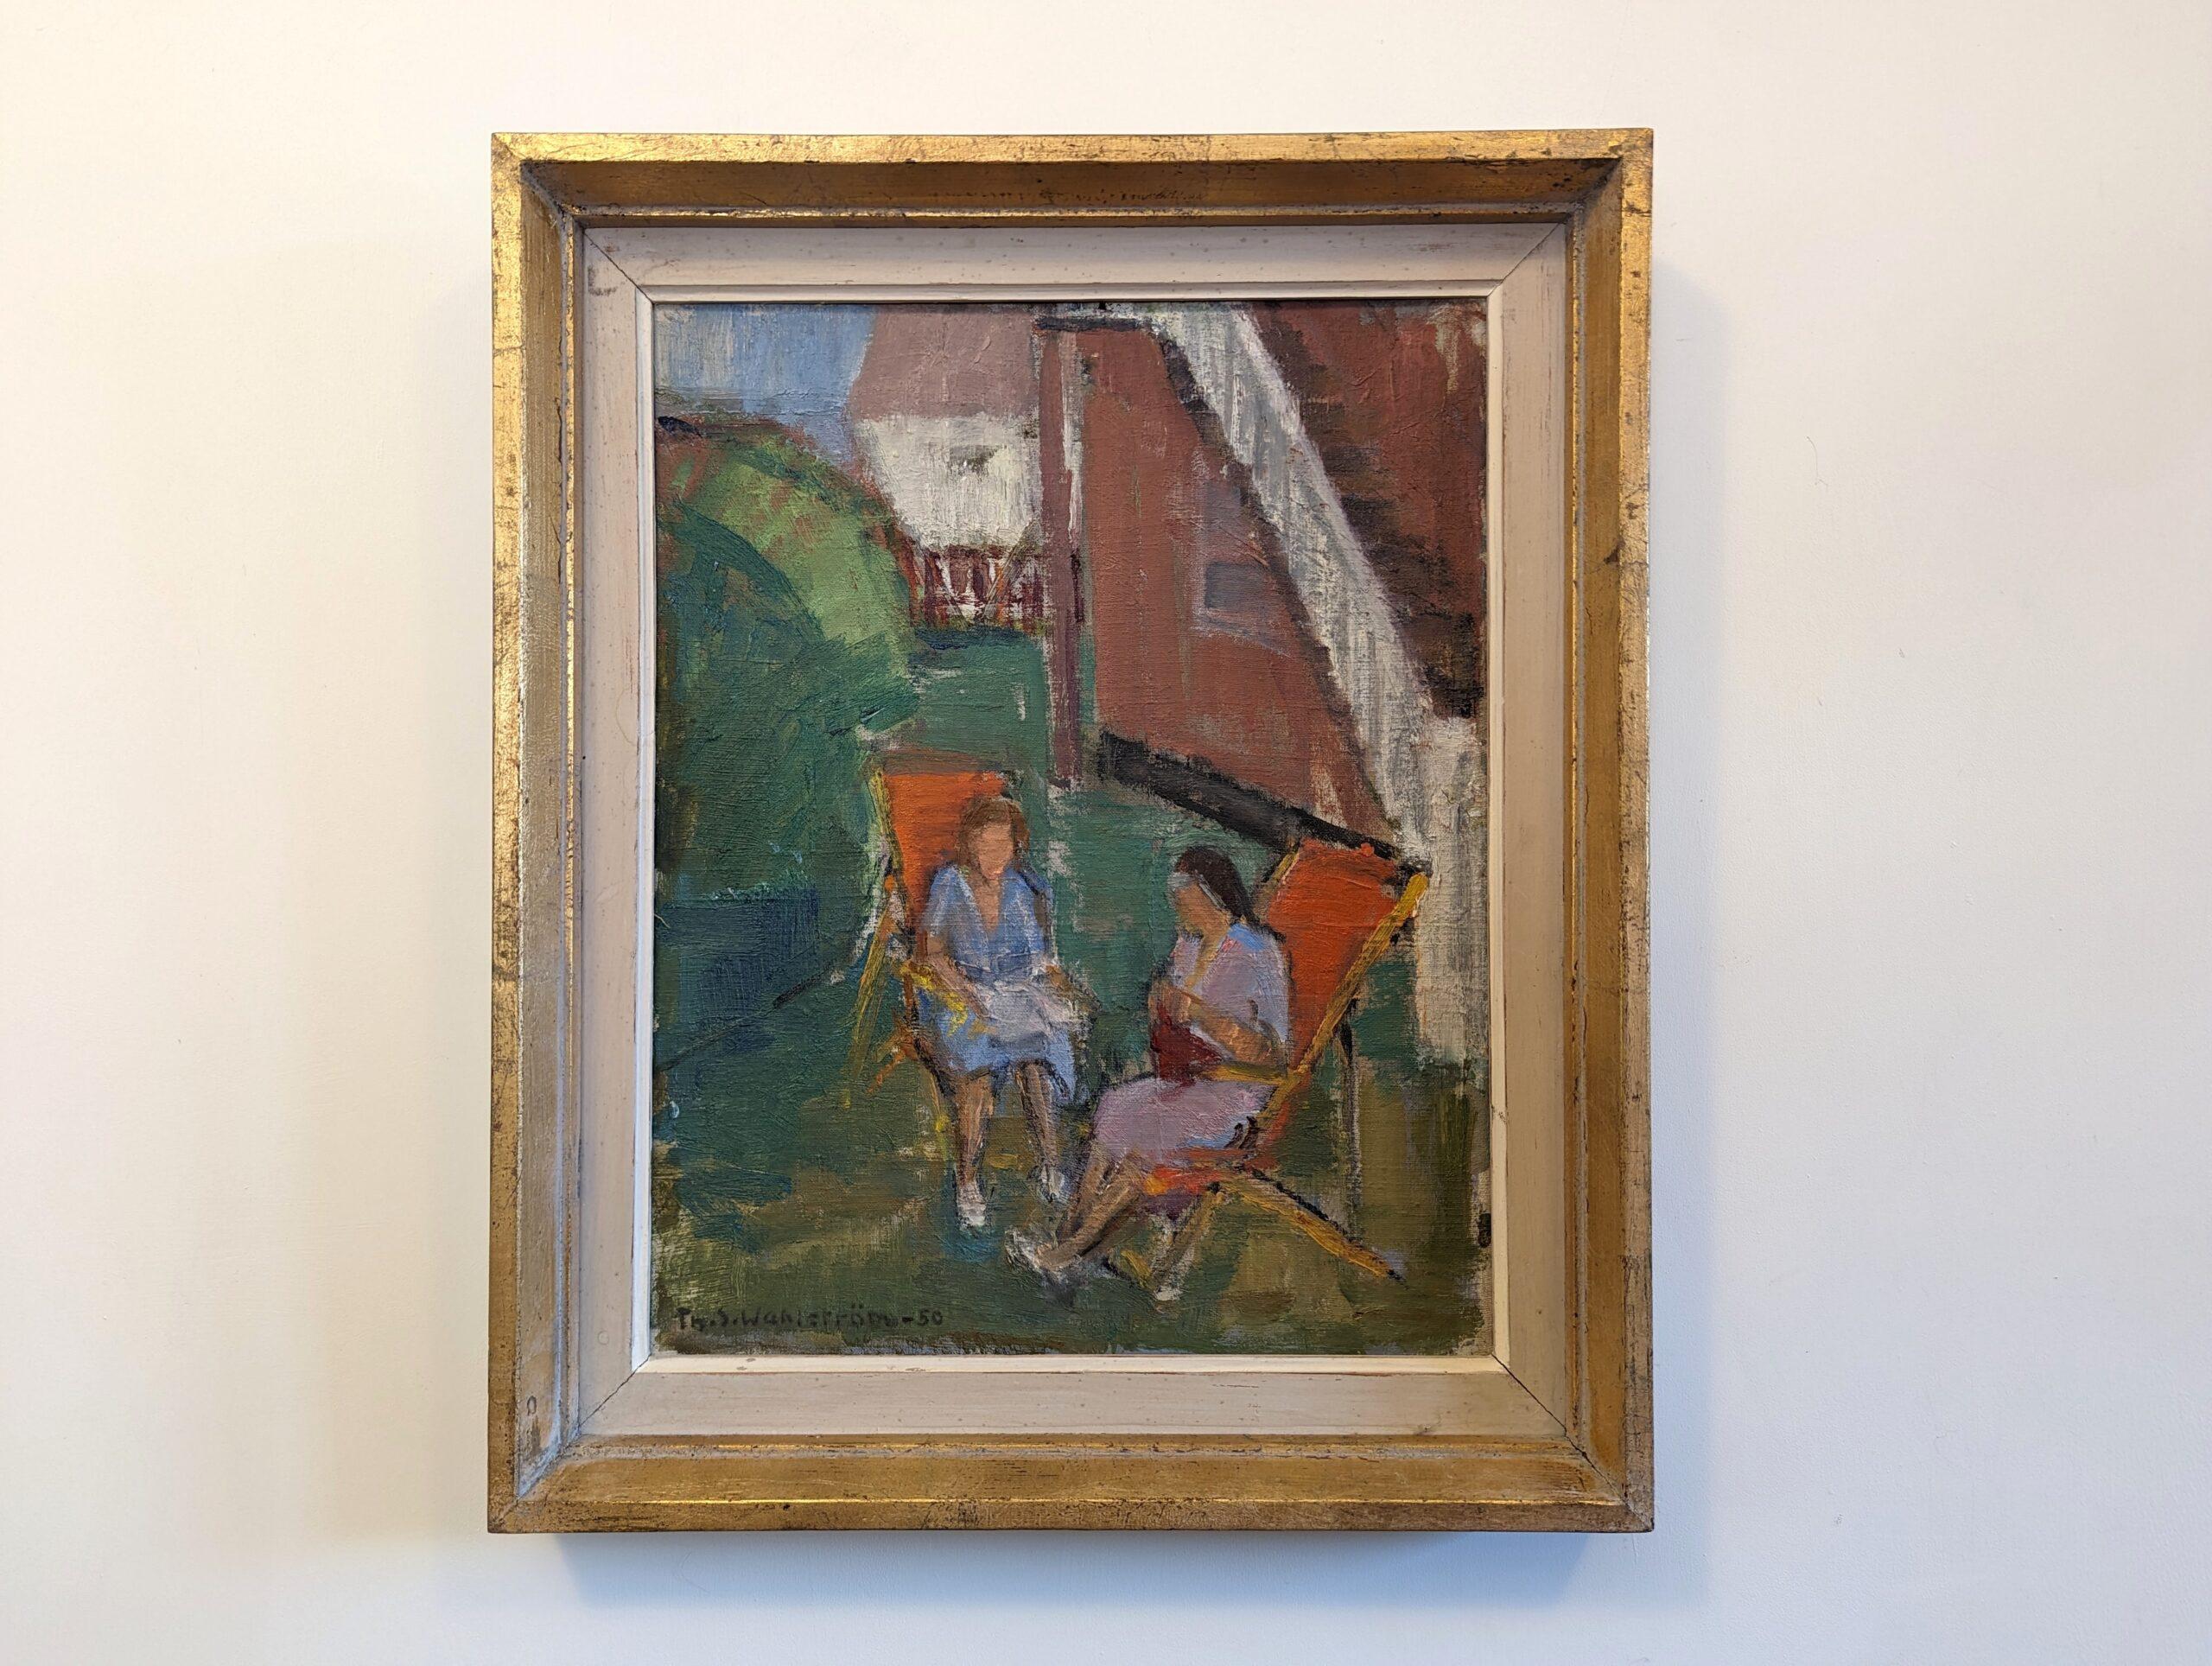 CROCHETING IN THE GARDEN
Size: 52 x 43.5 cm (including frame)
Oil on canvas

An endearing narrative oil painting that captures the essence of a serene moment in time, and dated 1950.

Two female figures, seated on vibrant orange loungers, are